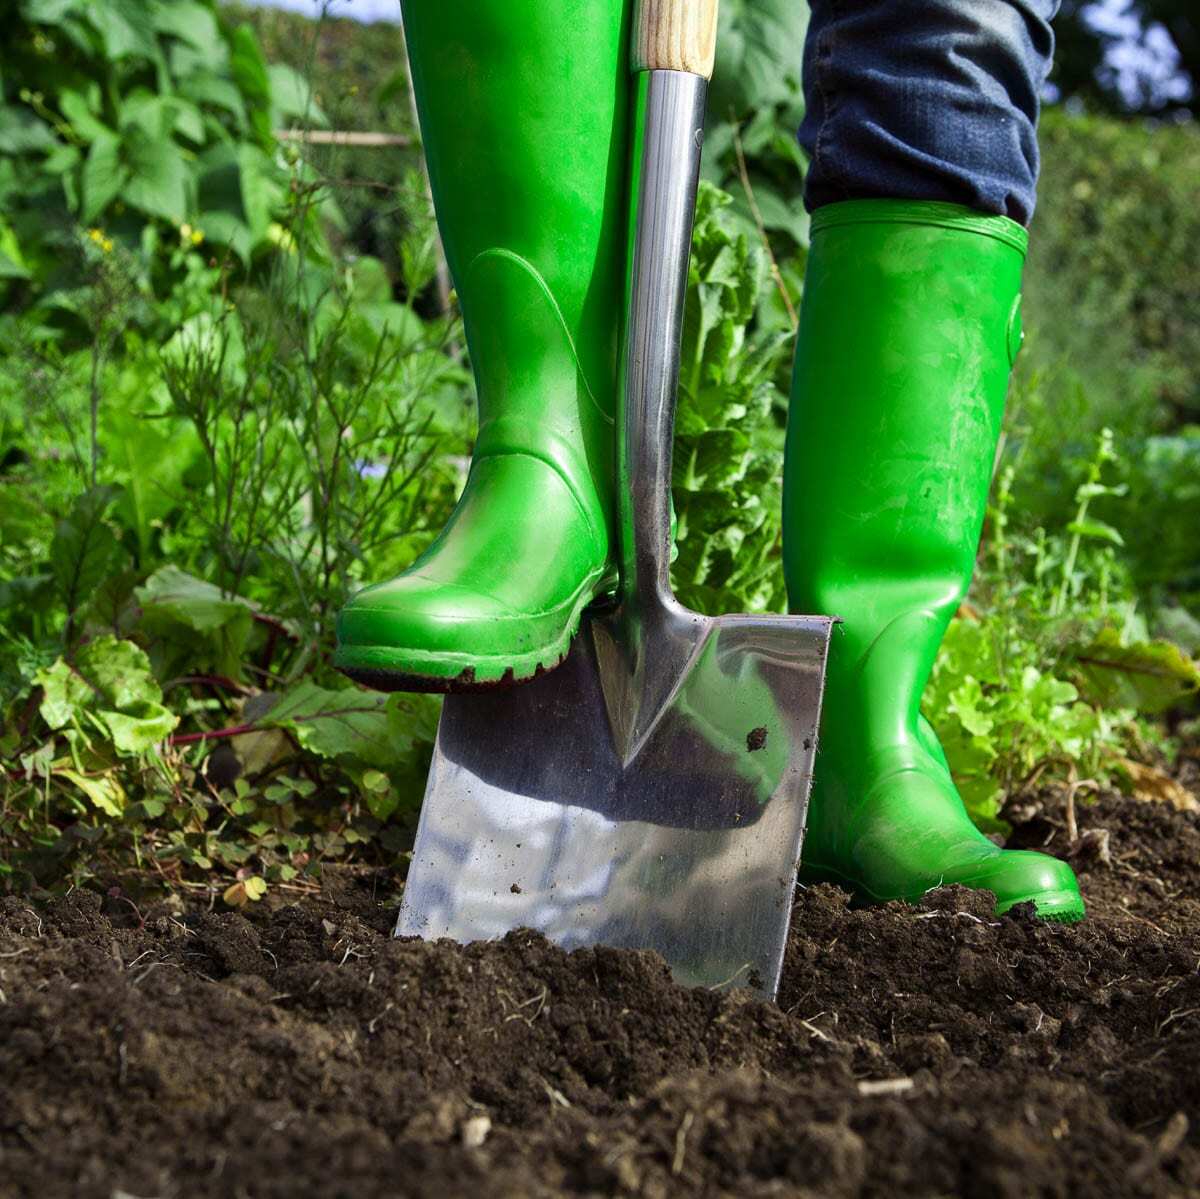 If you're planning a spring planting or an outdoor project that involves digging, call 8-1-1 at least two business days ahead to have underground utility lines located. Photo courtesy of NW Natural